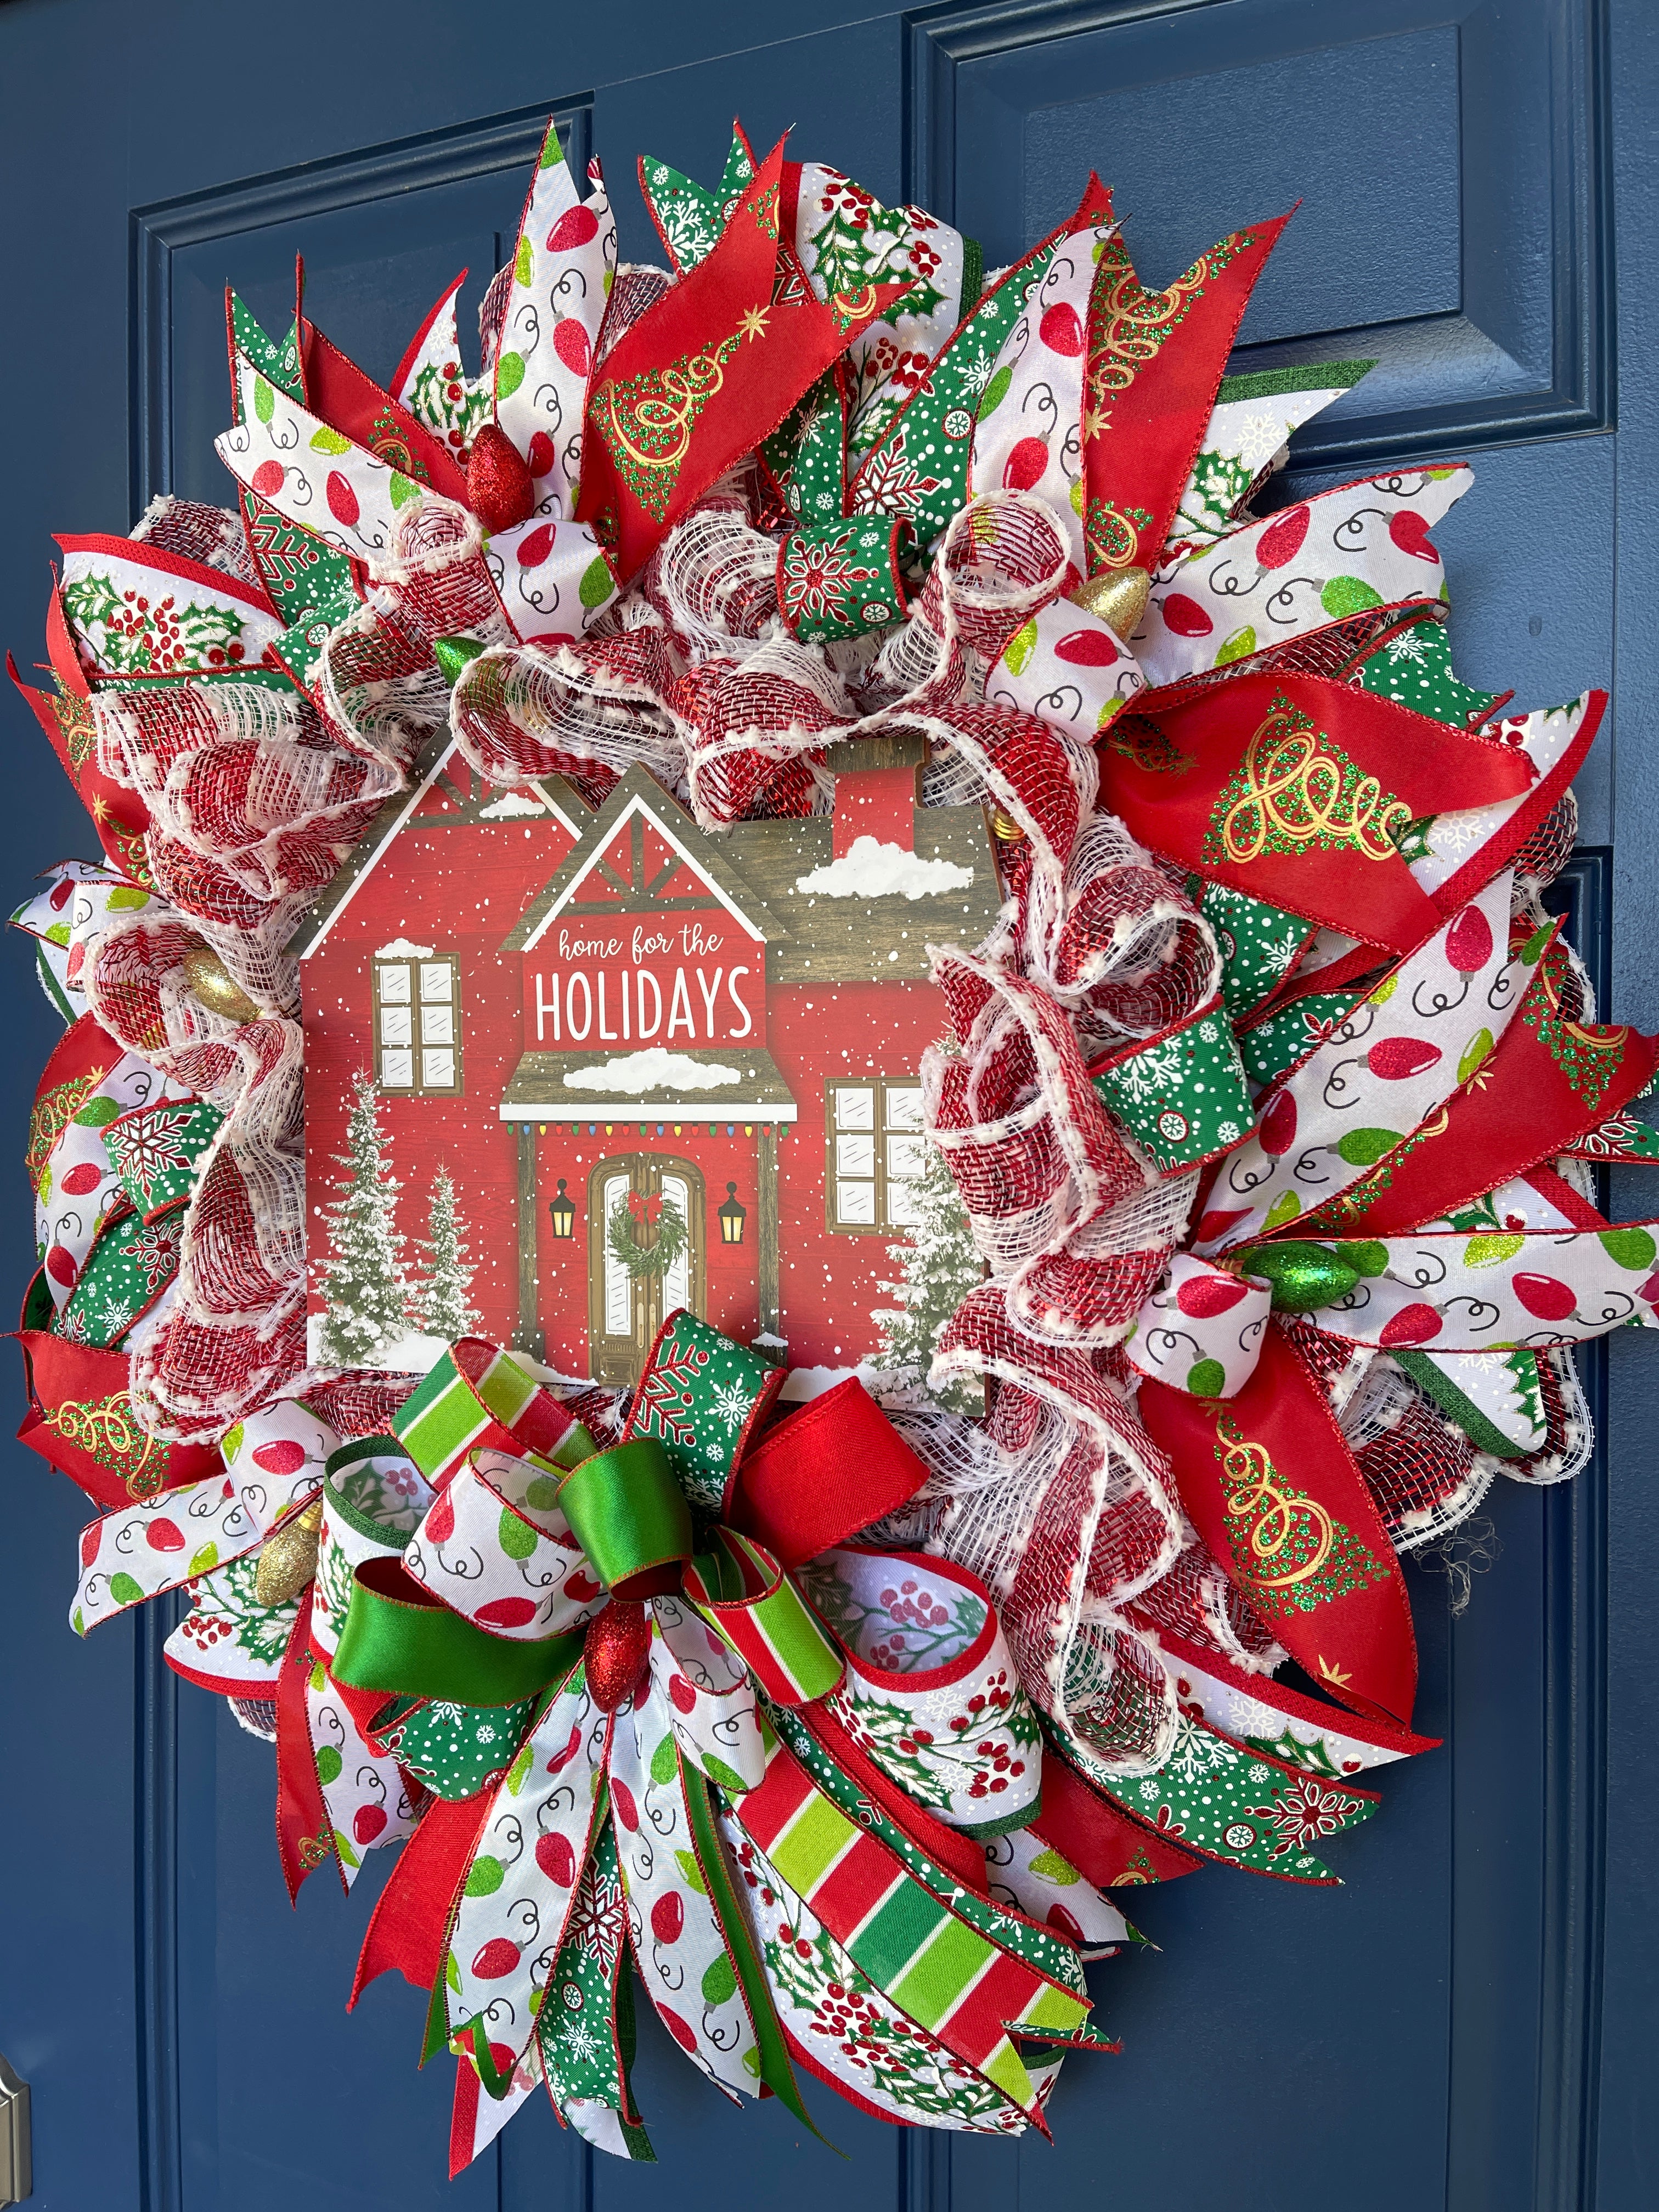 Right Side View of Red, White and Green Home for the Holidays Christmas Deco Mesh Wreath on a Blue Front Door